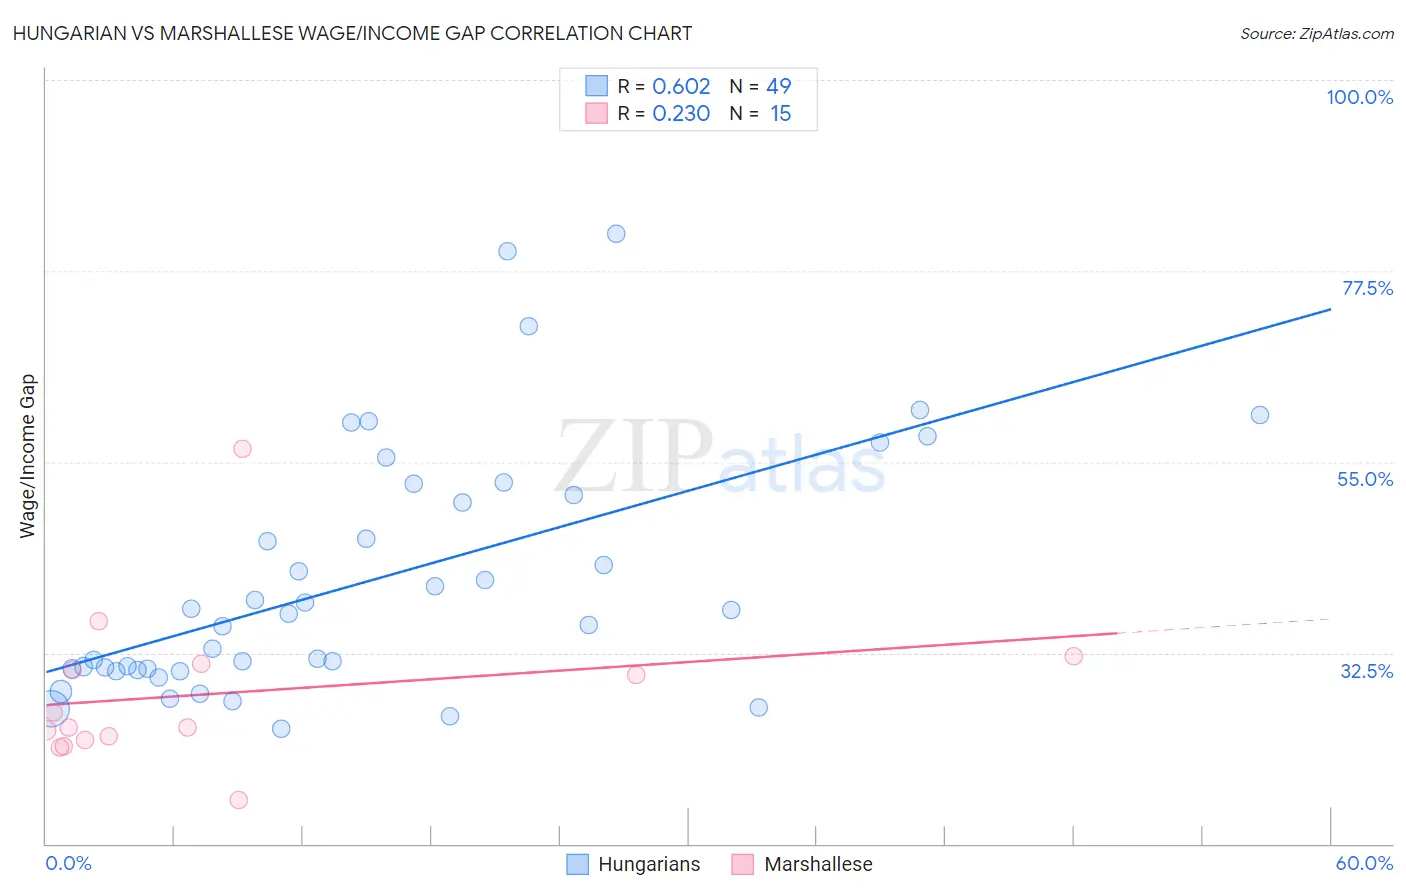 Hungarian vs Marshallese Wage/Income Gap